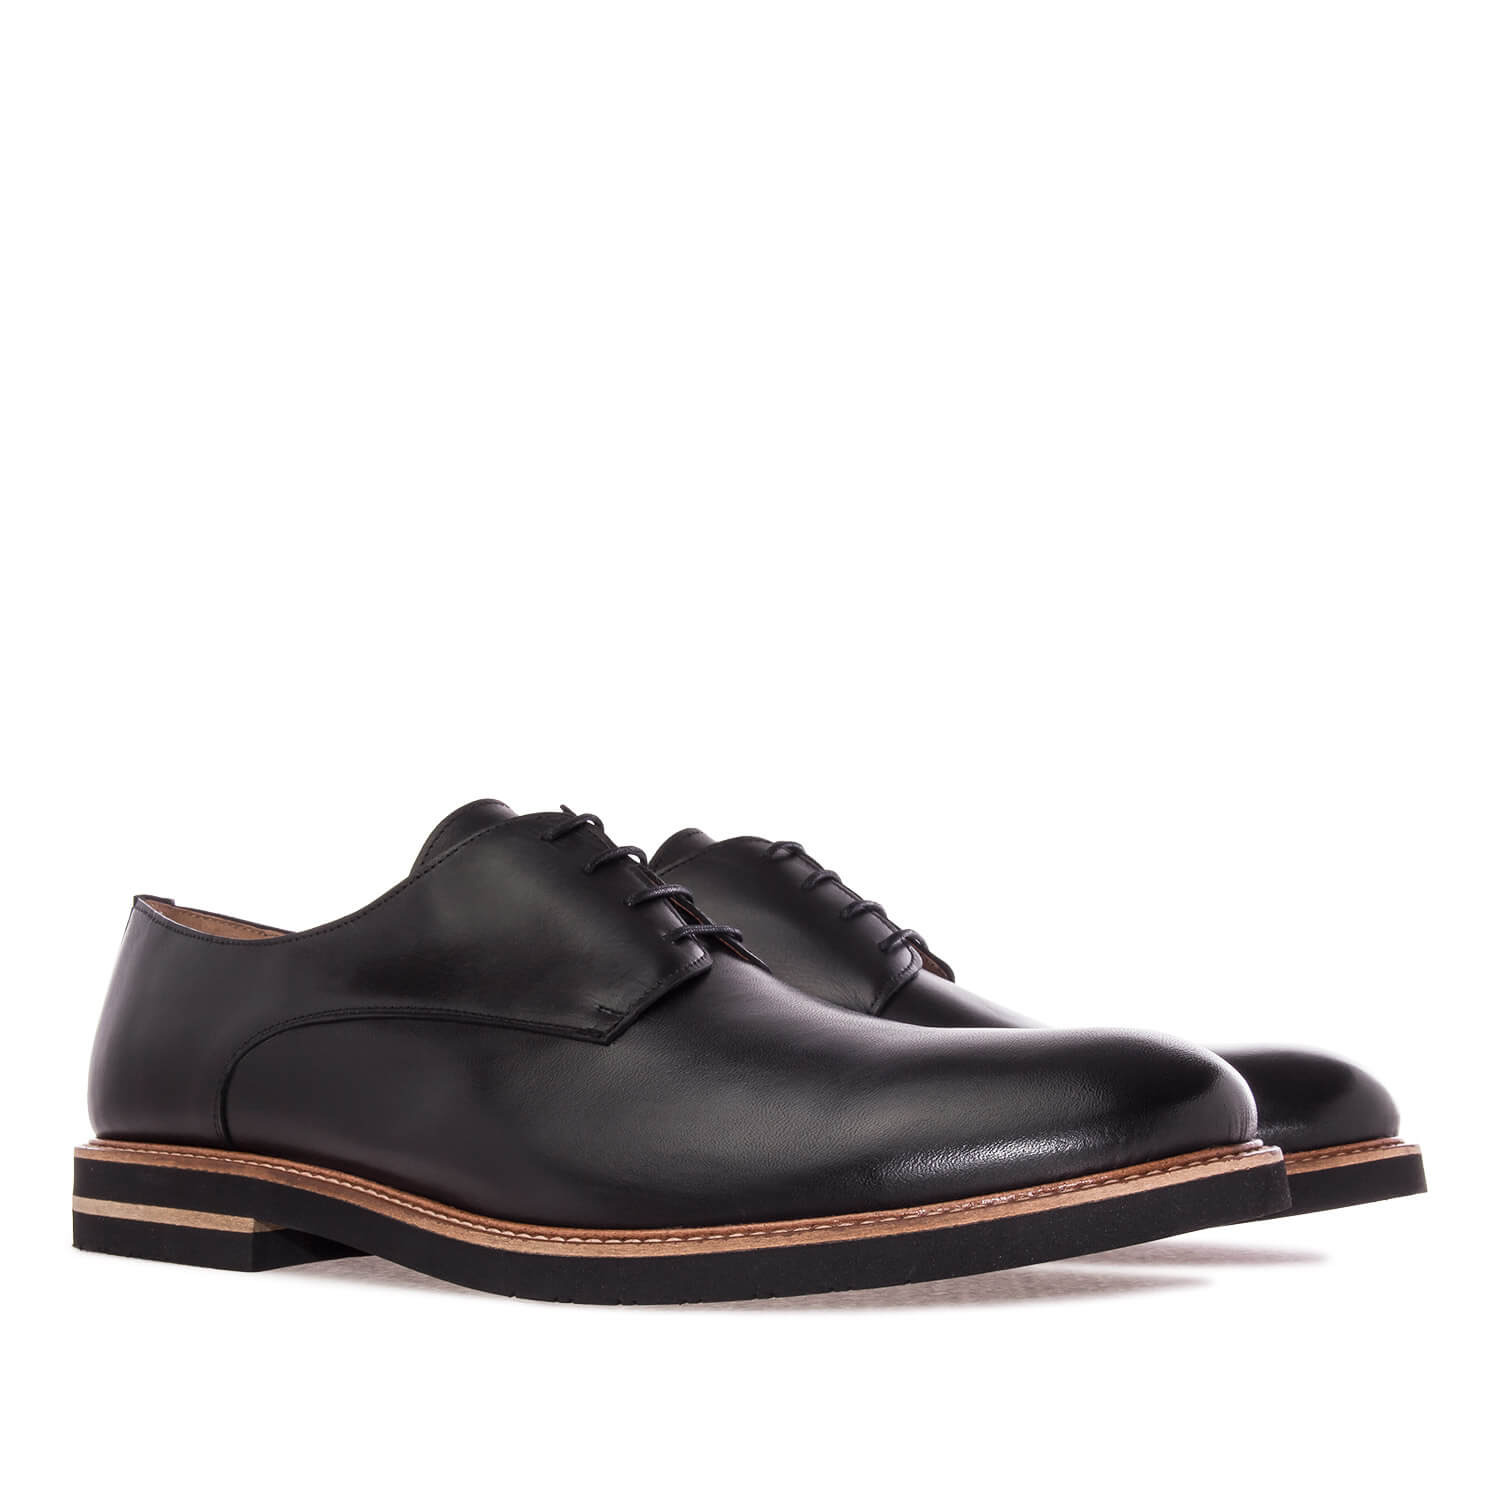 Men's Shoes in Black Leather 